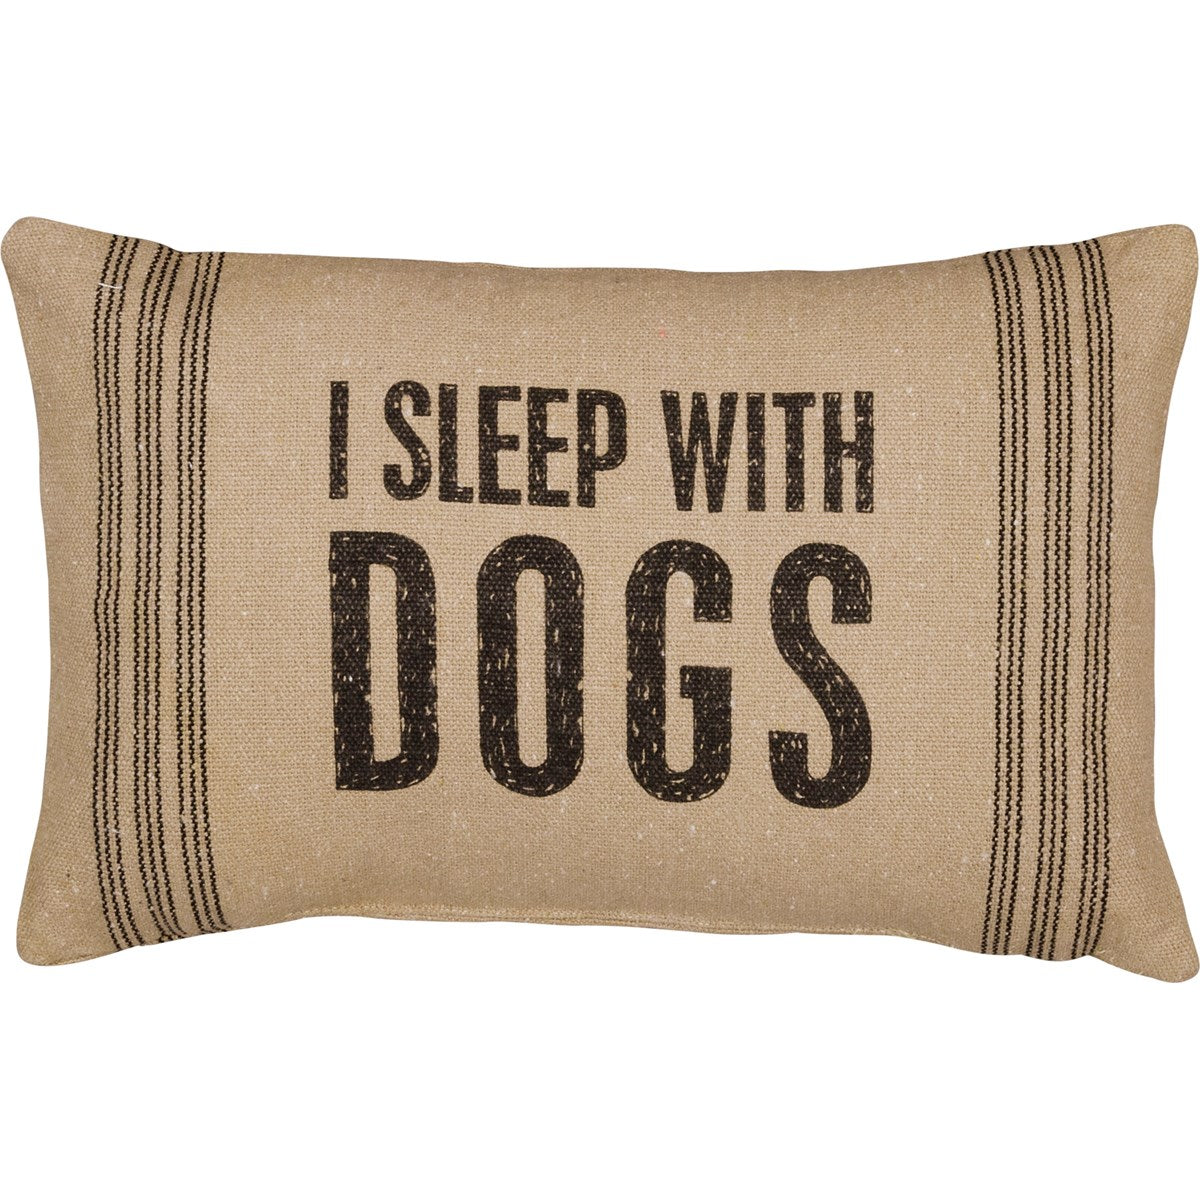 Pillow - "I Sleep With Dogs"